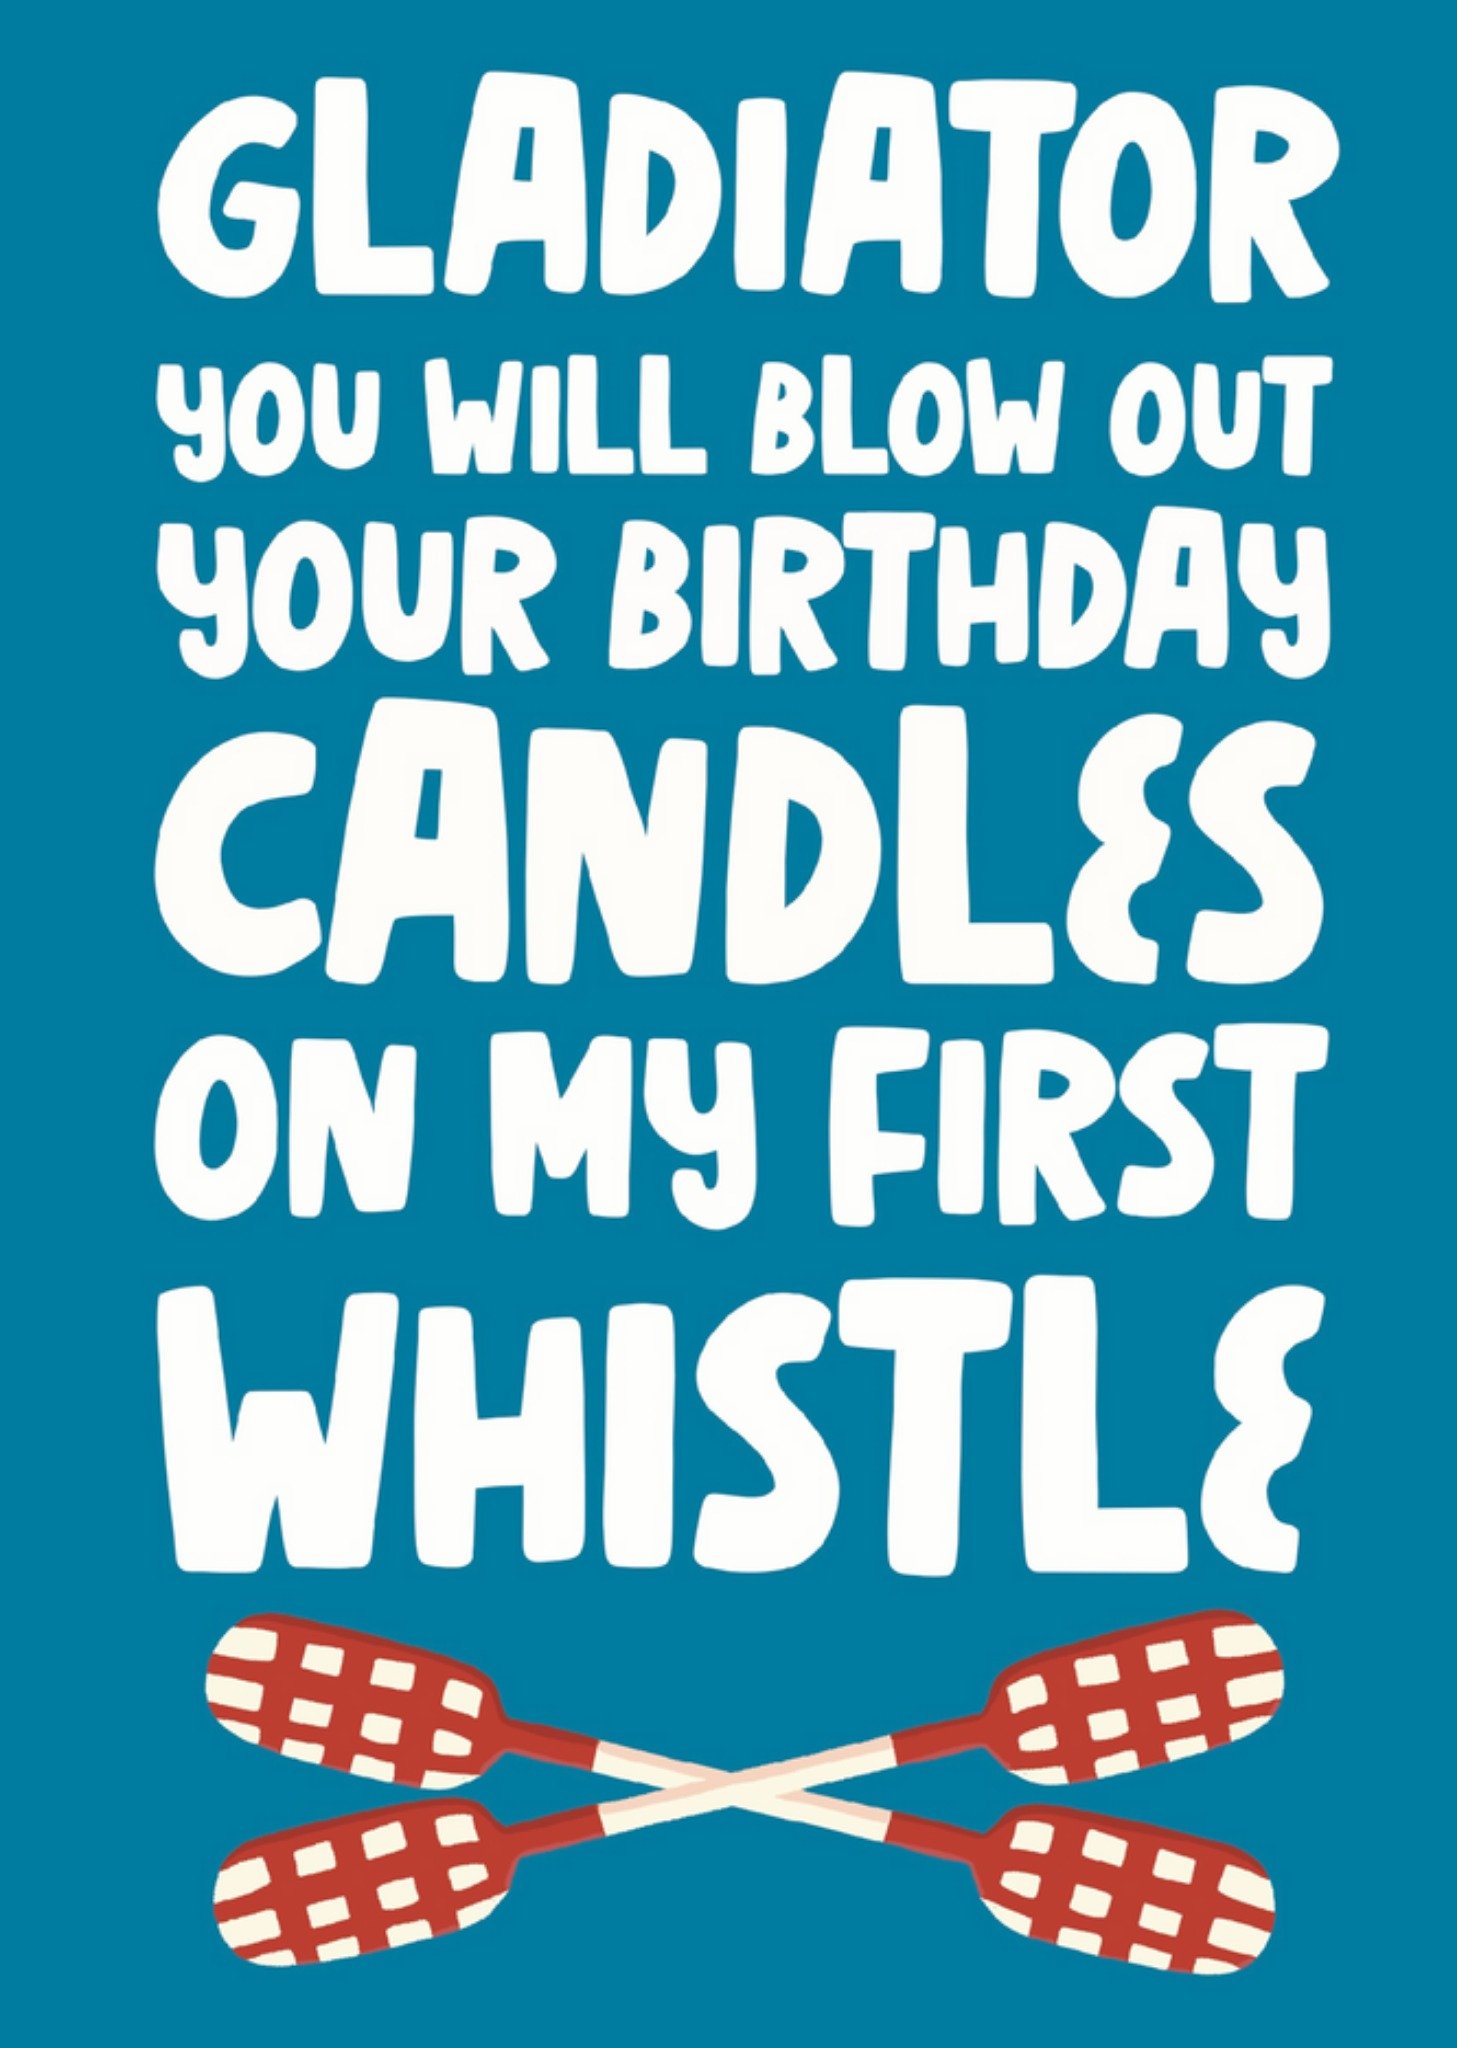 Moonpig Gladiator You Will Blow Out Your Birthday Candles On My First Whistle Card, Large